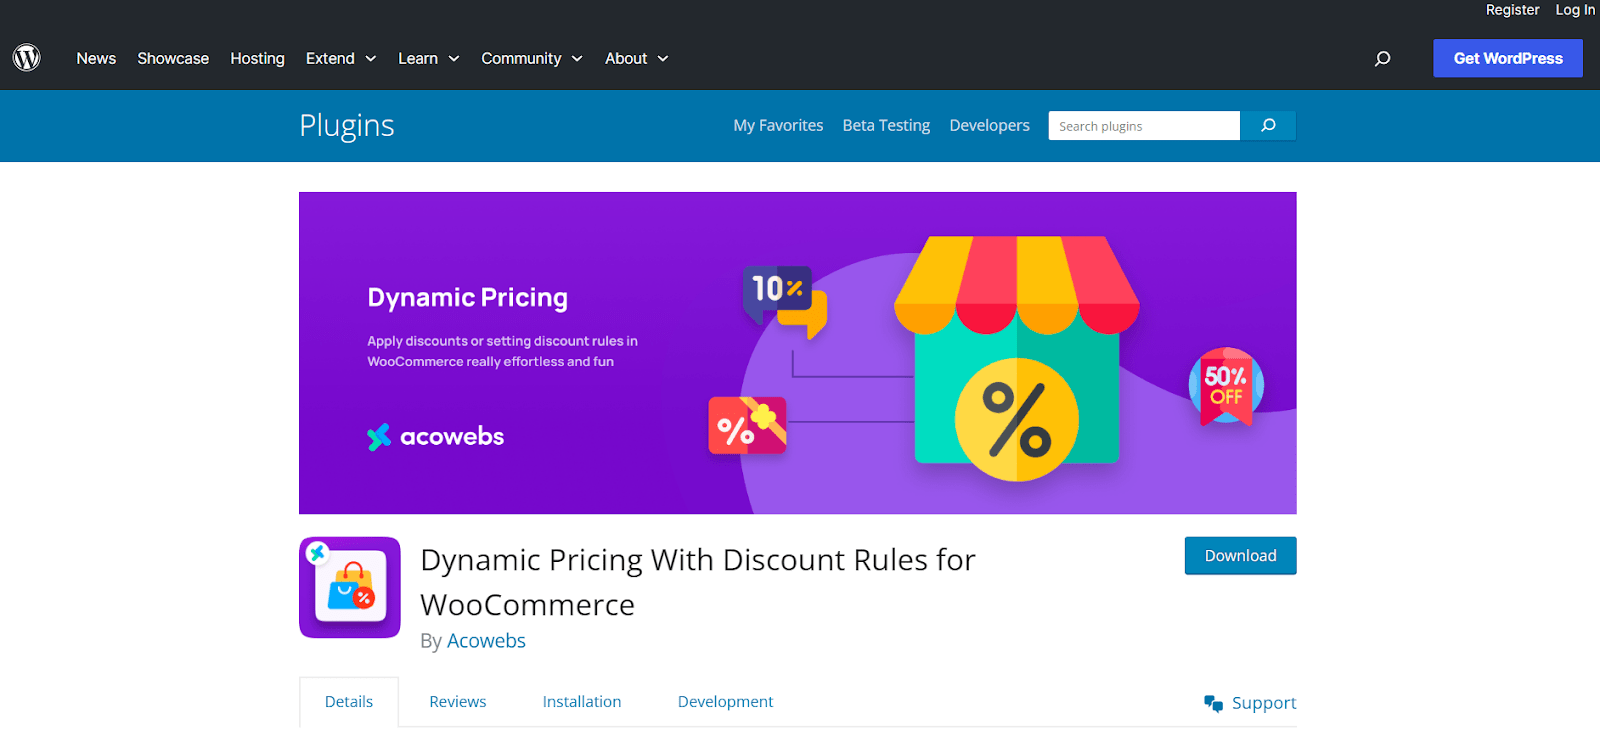 Dynamic Pricing With Discount Rules for WooCommerce plugin